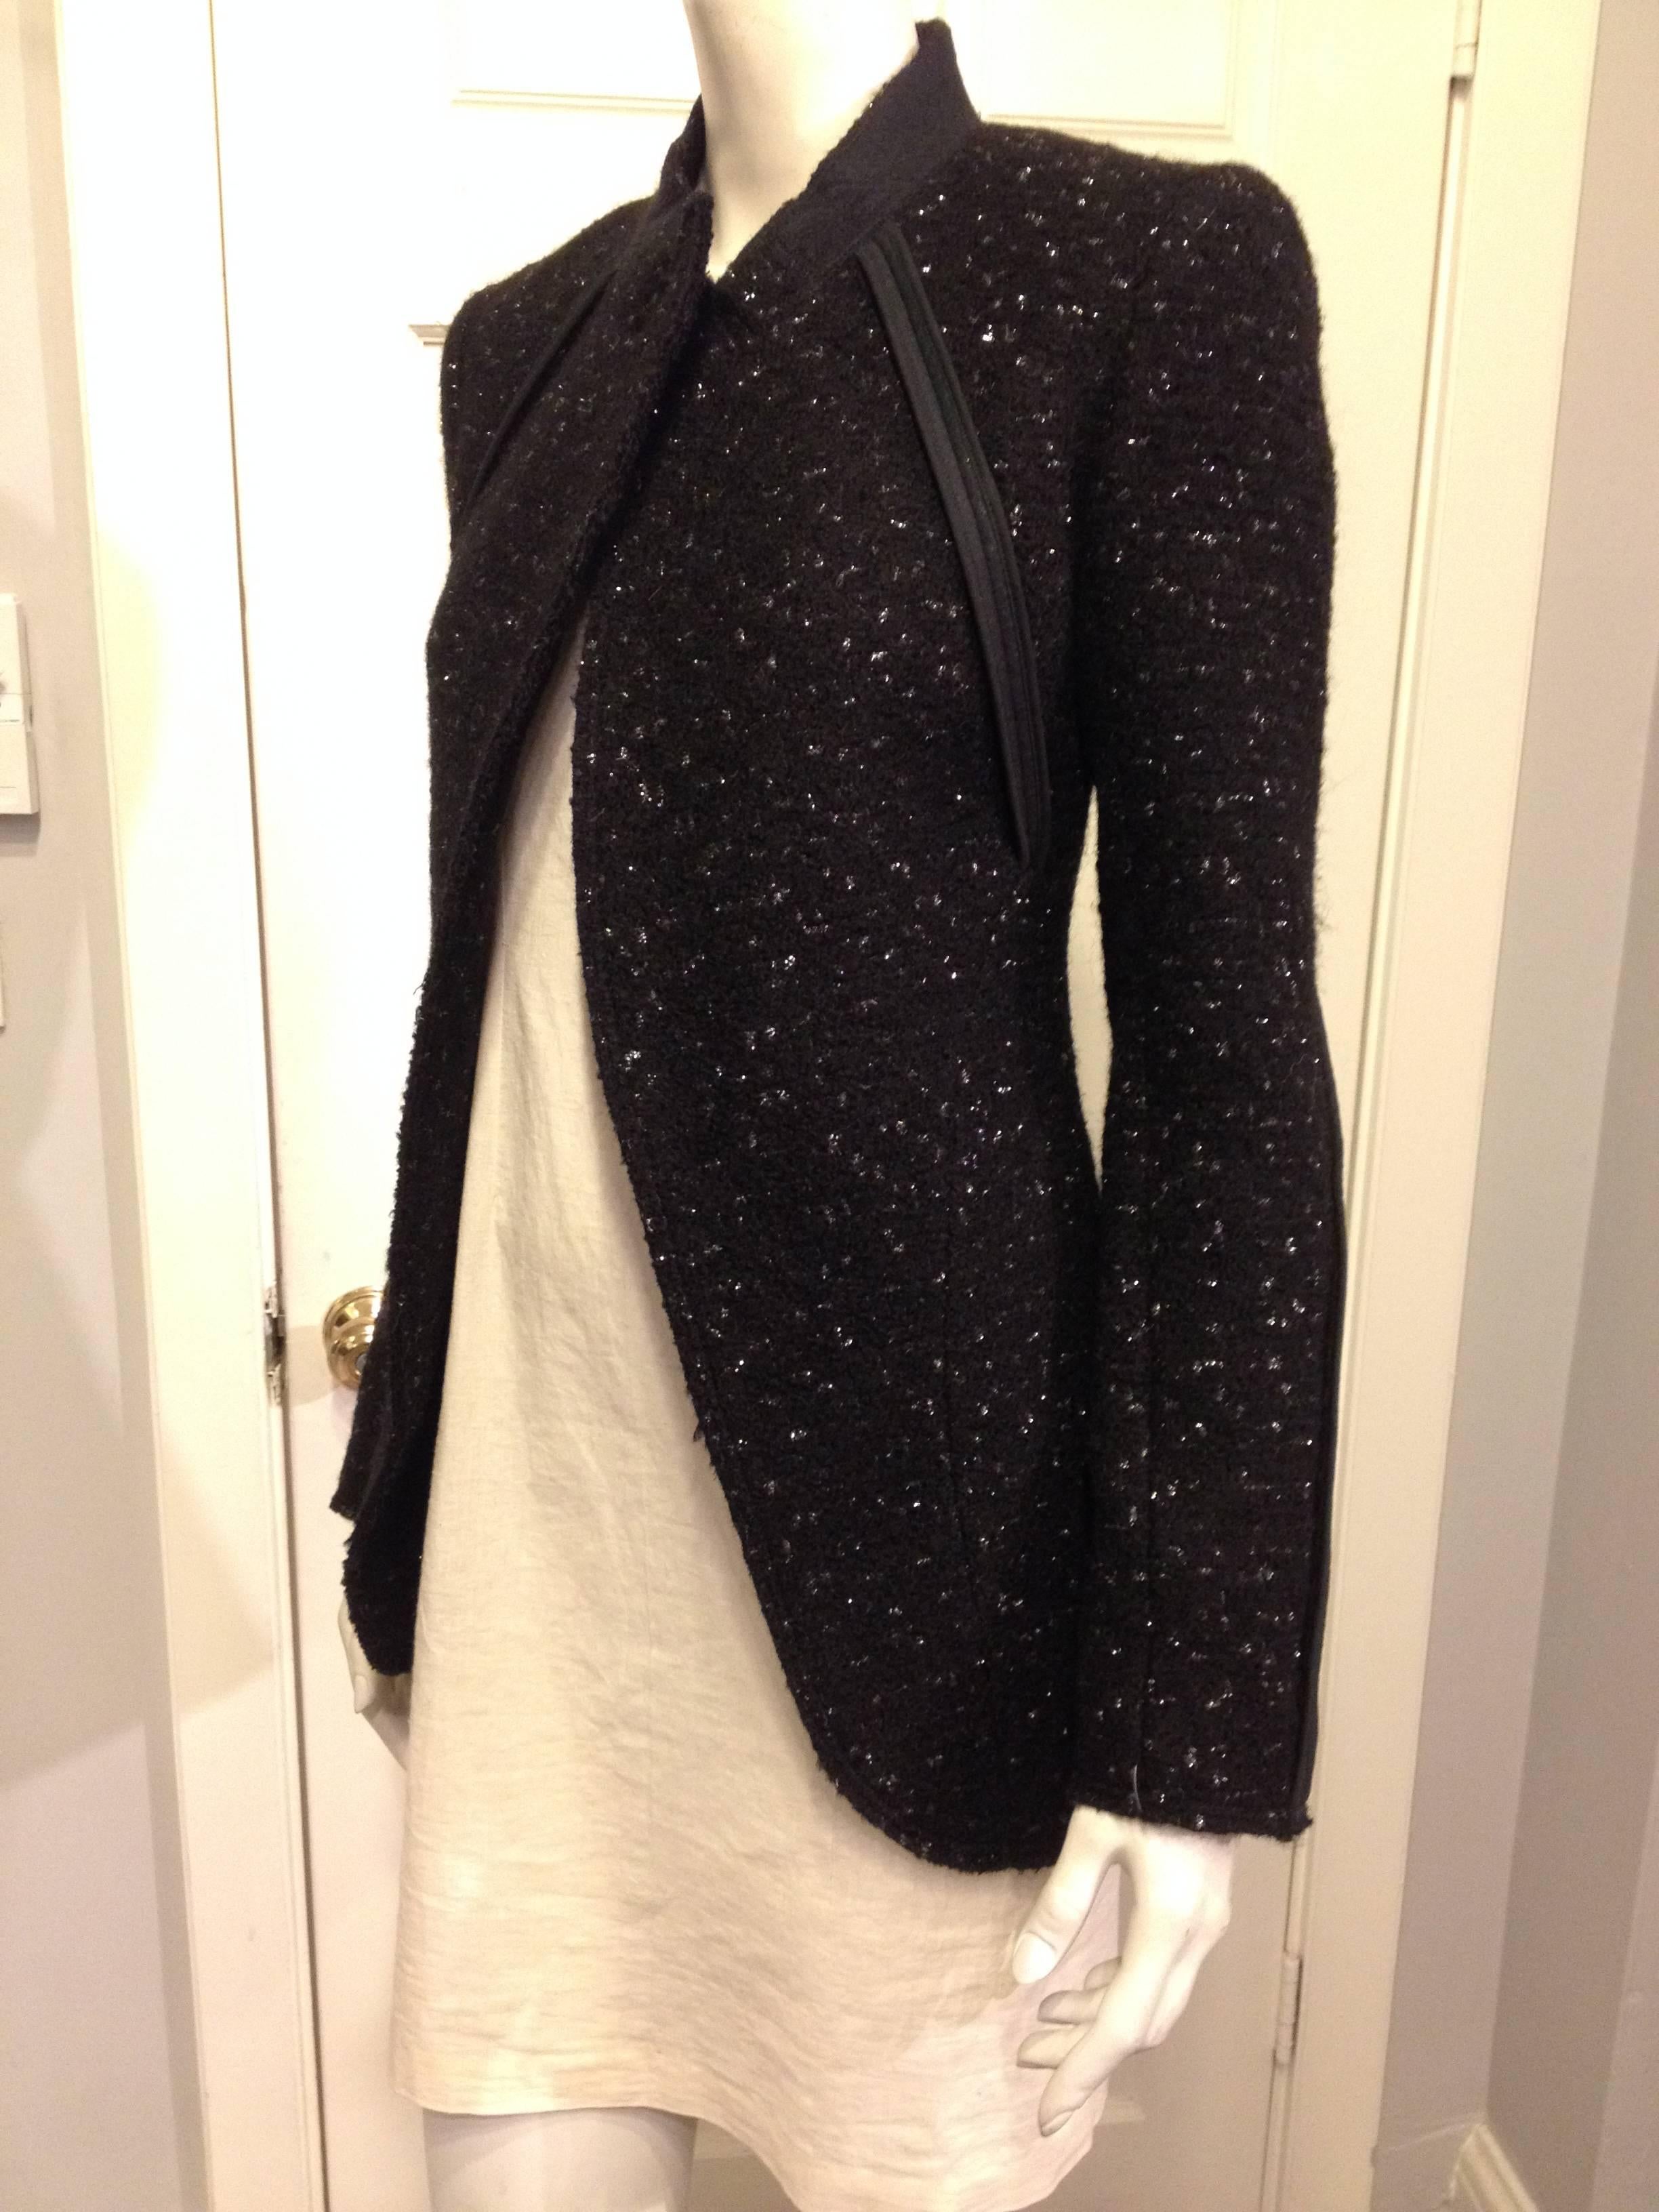 Cool and minimal but fun at the same time, this jacket is cut from ultra plush black material flecked with subtle silver spangles all over. The front is cut sharply with back-turned lapels and sweeping open lines, and each seam is finished but left